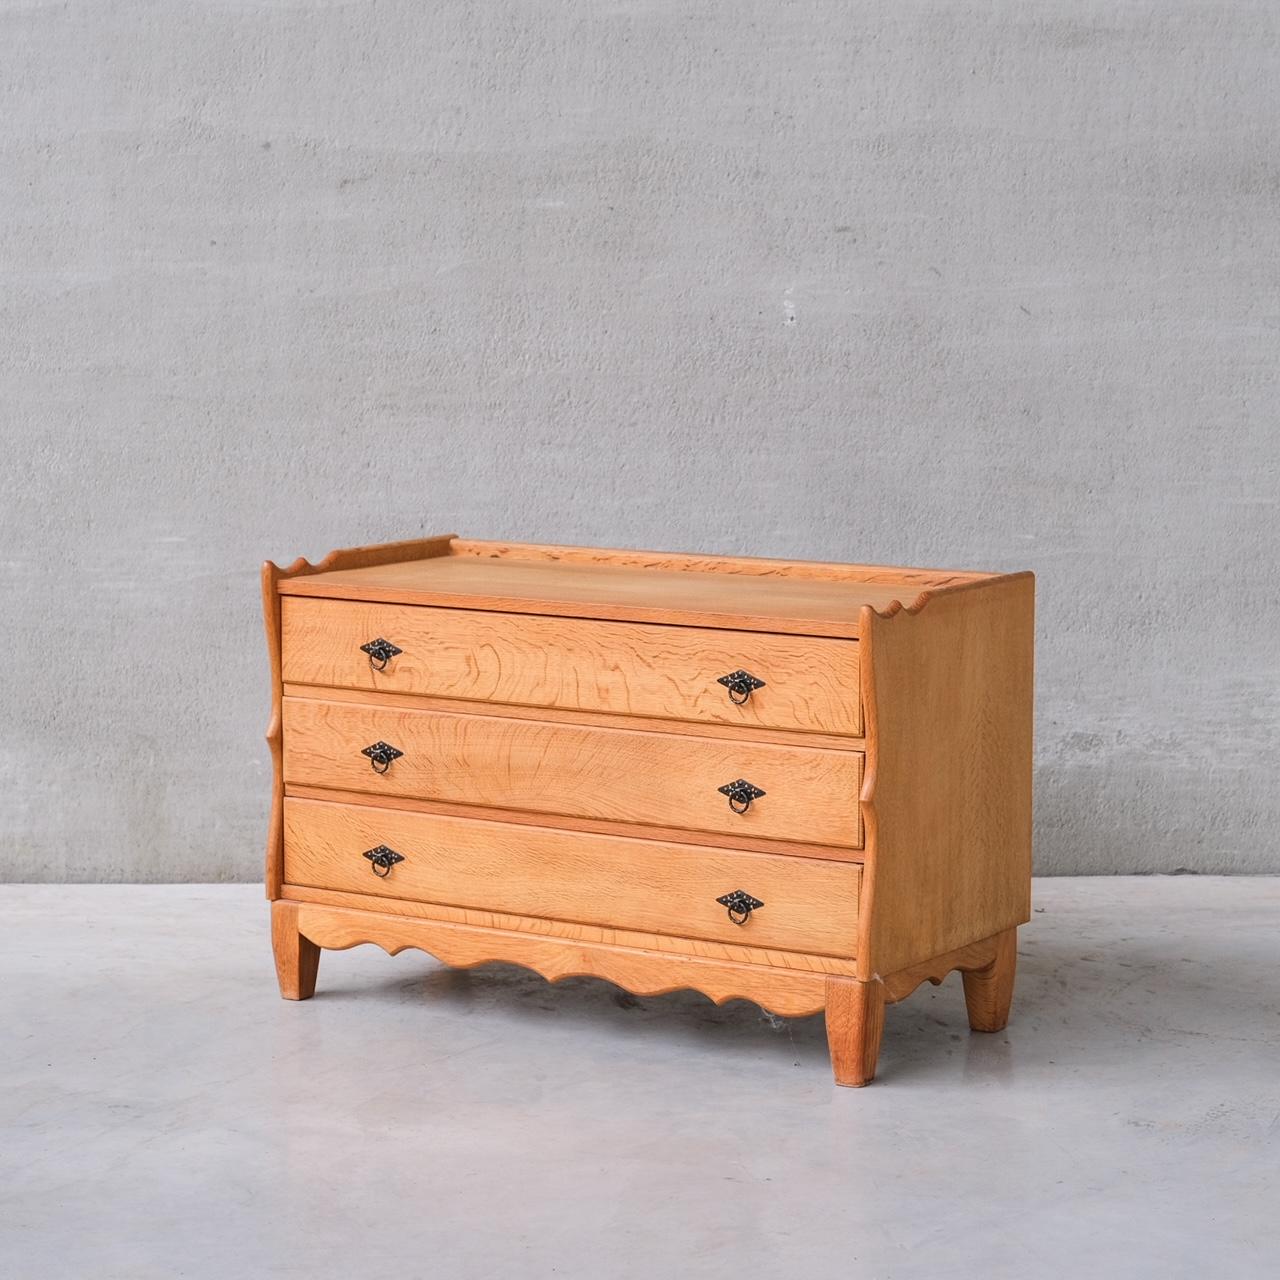 A single blonde oak chest of drawers.

Denmark, c1960s.

Three drawers with dual handles, with elegant carved base.

Good vintage condition, some scuffs and wear commensurate with age.

Internal Ref: 18/10/23/036.

Location: Belgium